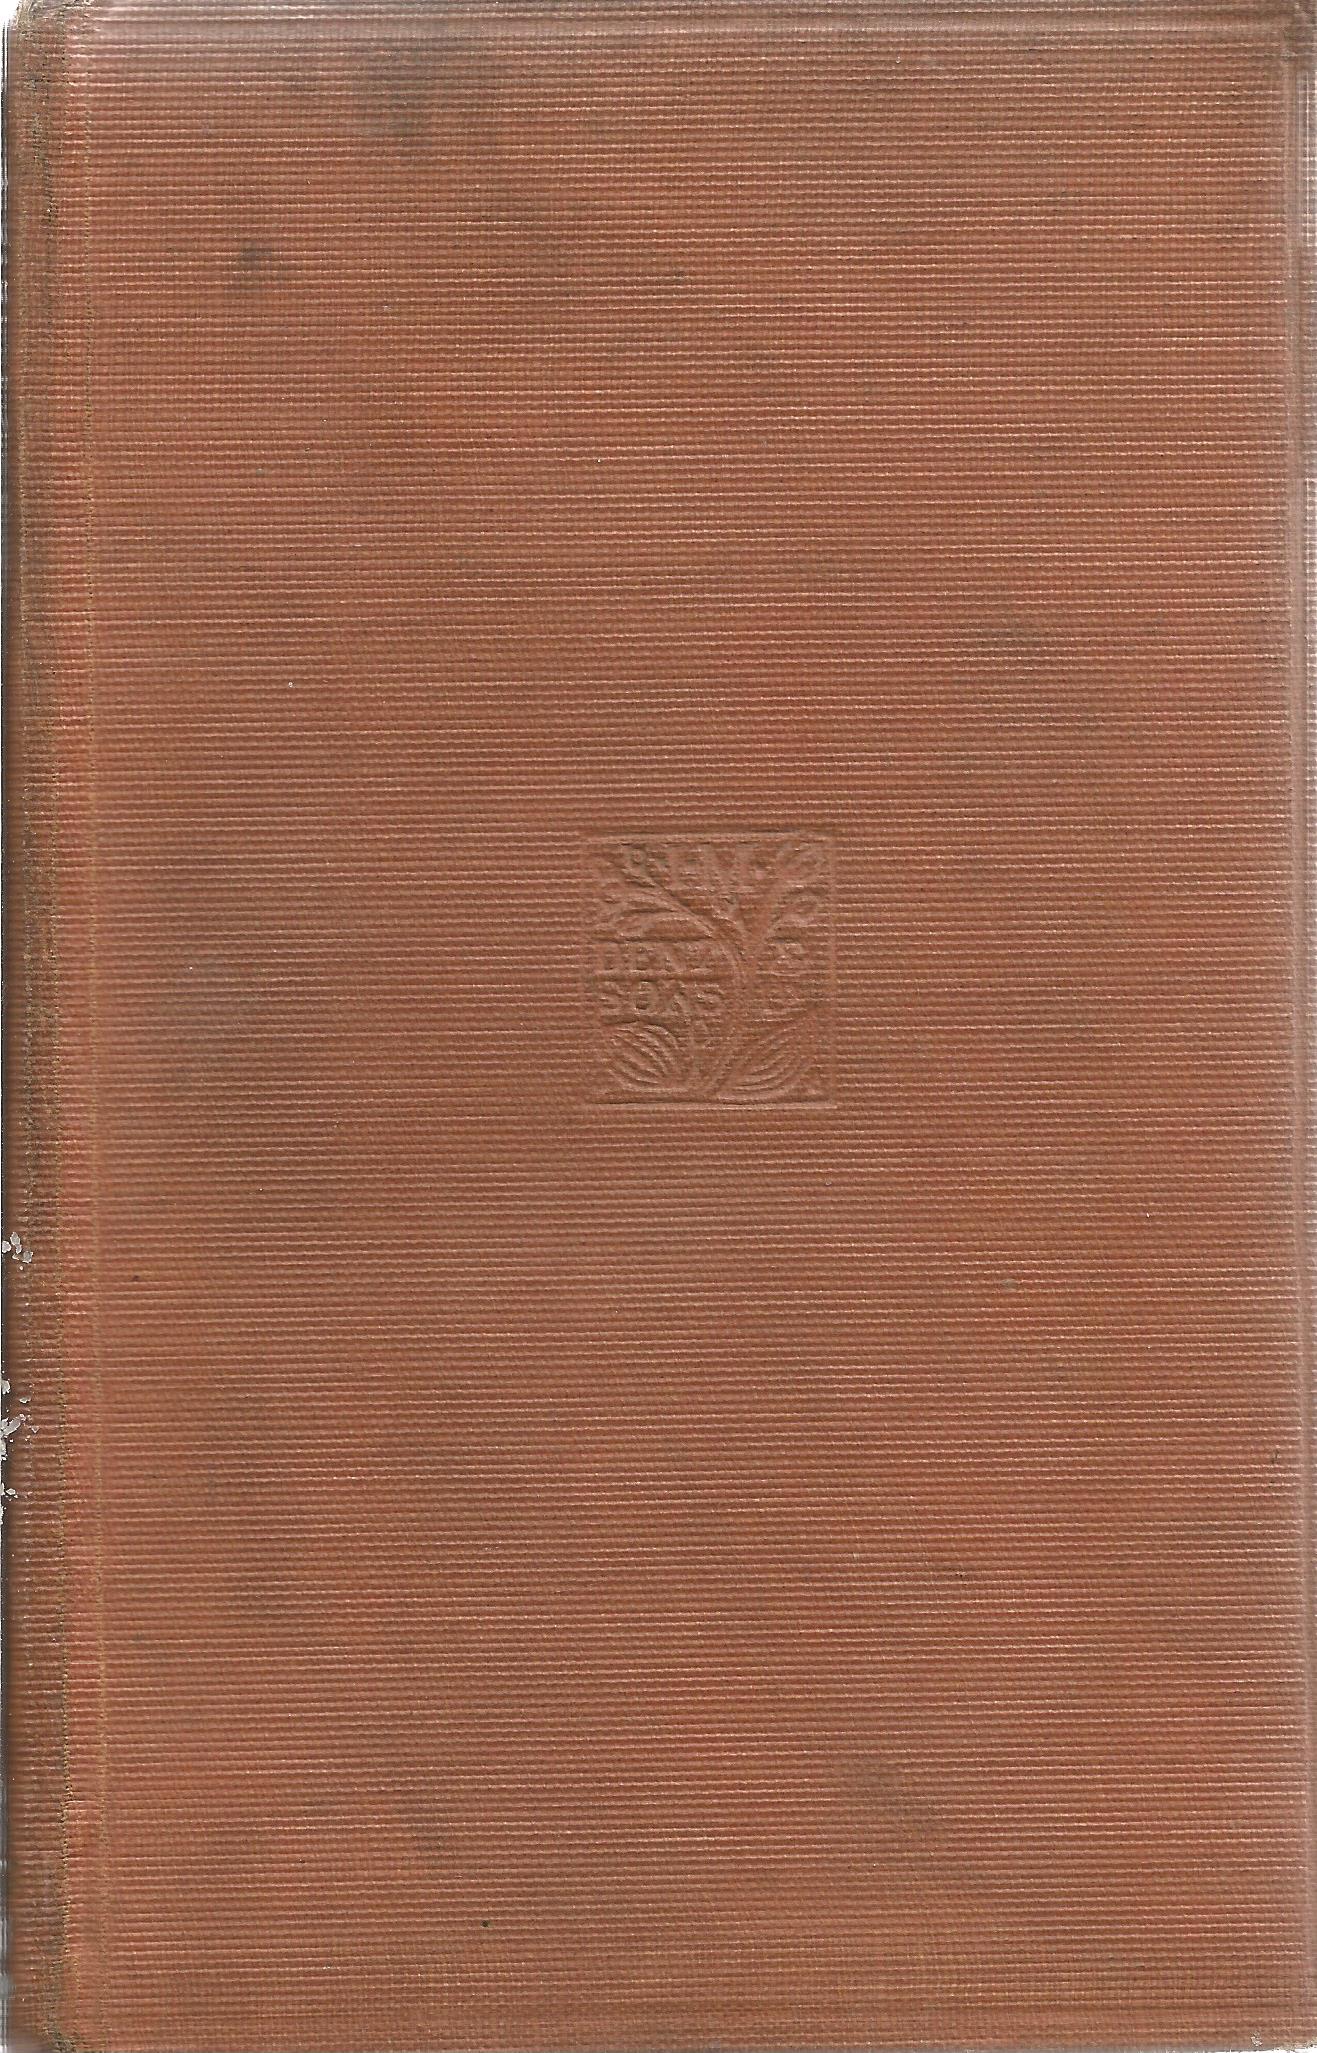 John Florio hardback book The Essays of Michael Lord of Montaigne 1915 published by J M Dent &